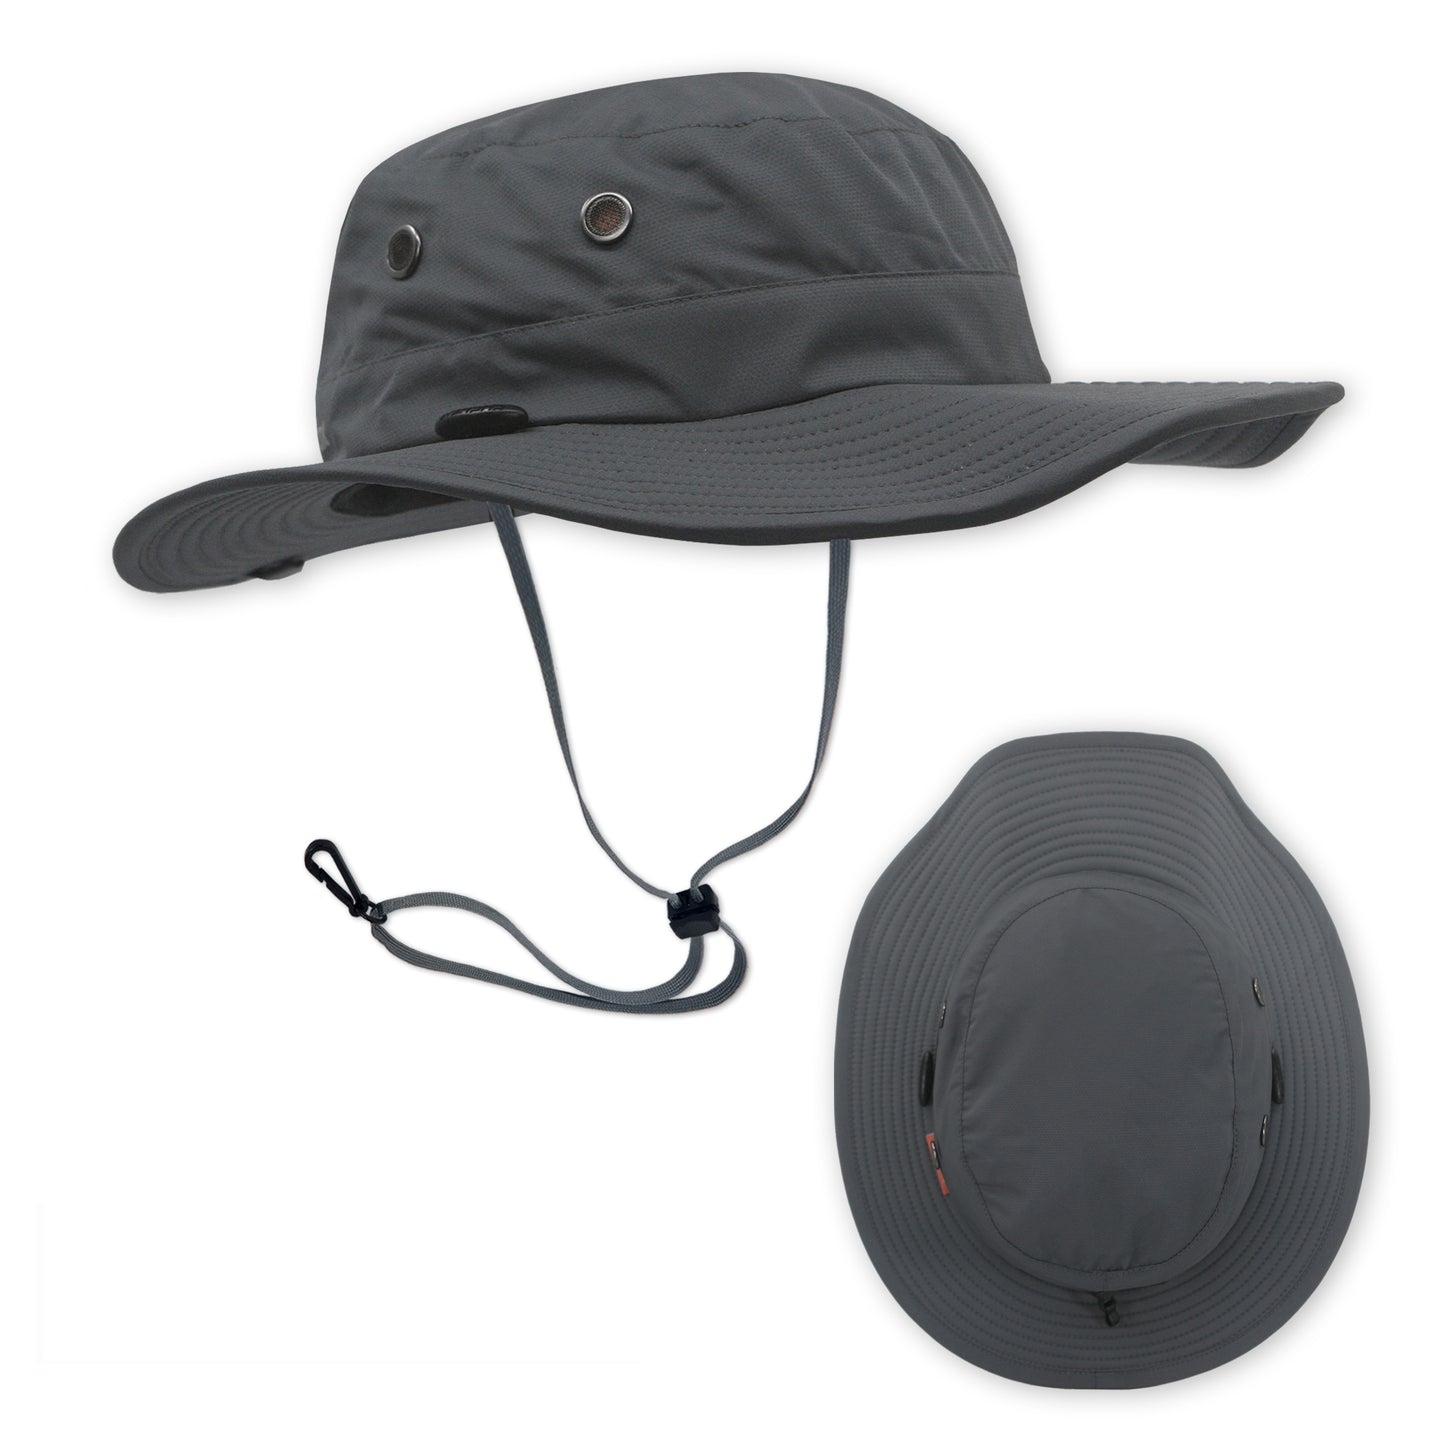 The Seahawk Mid Brim sun hat in the color Storm Grey